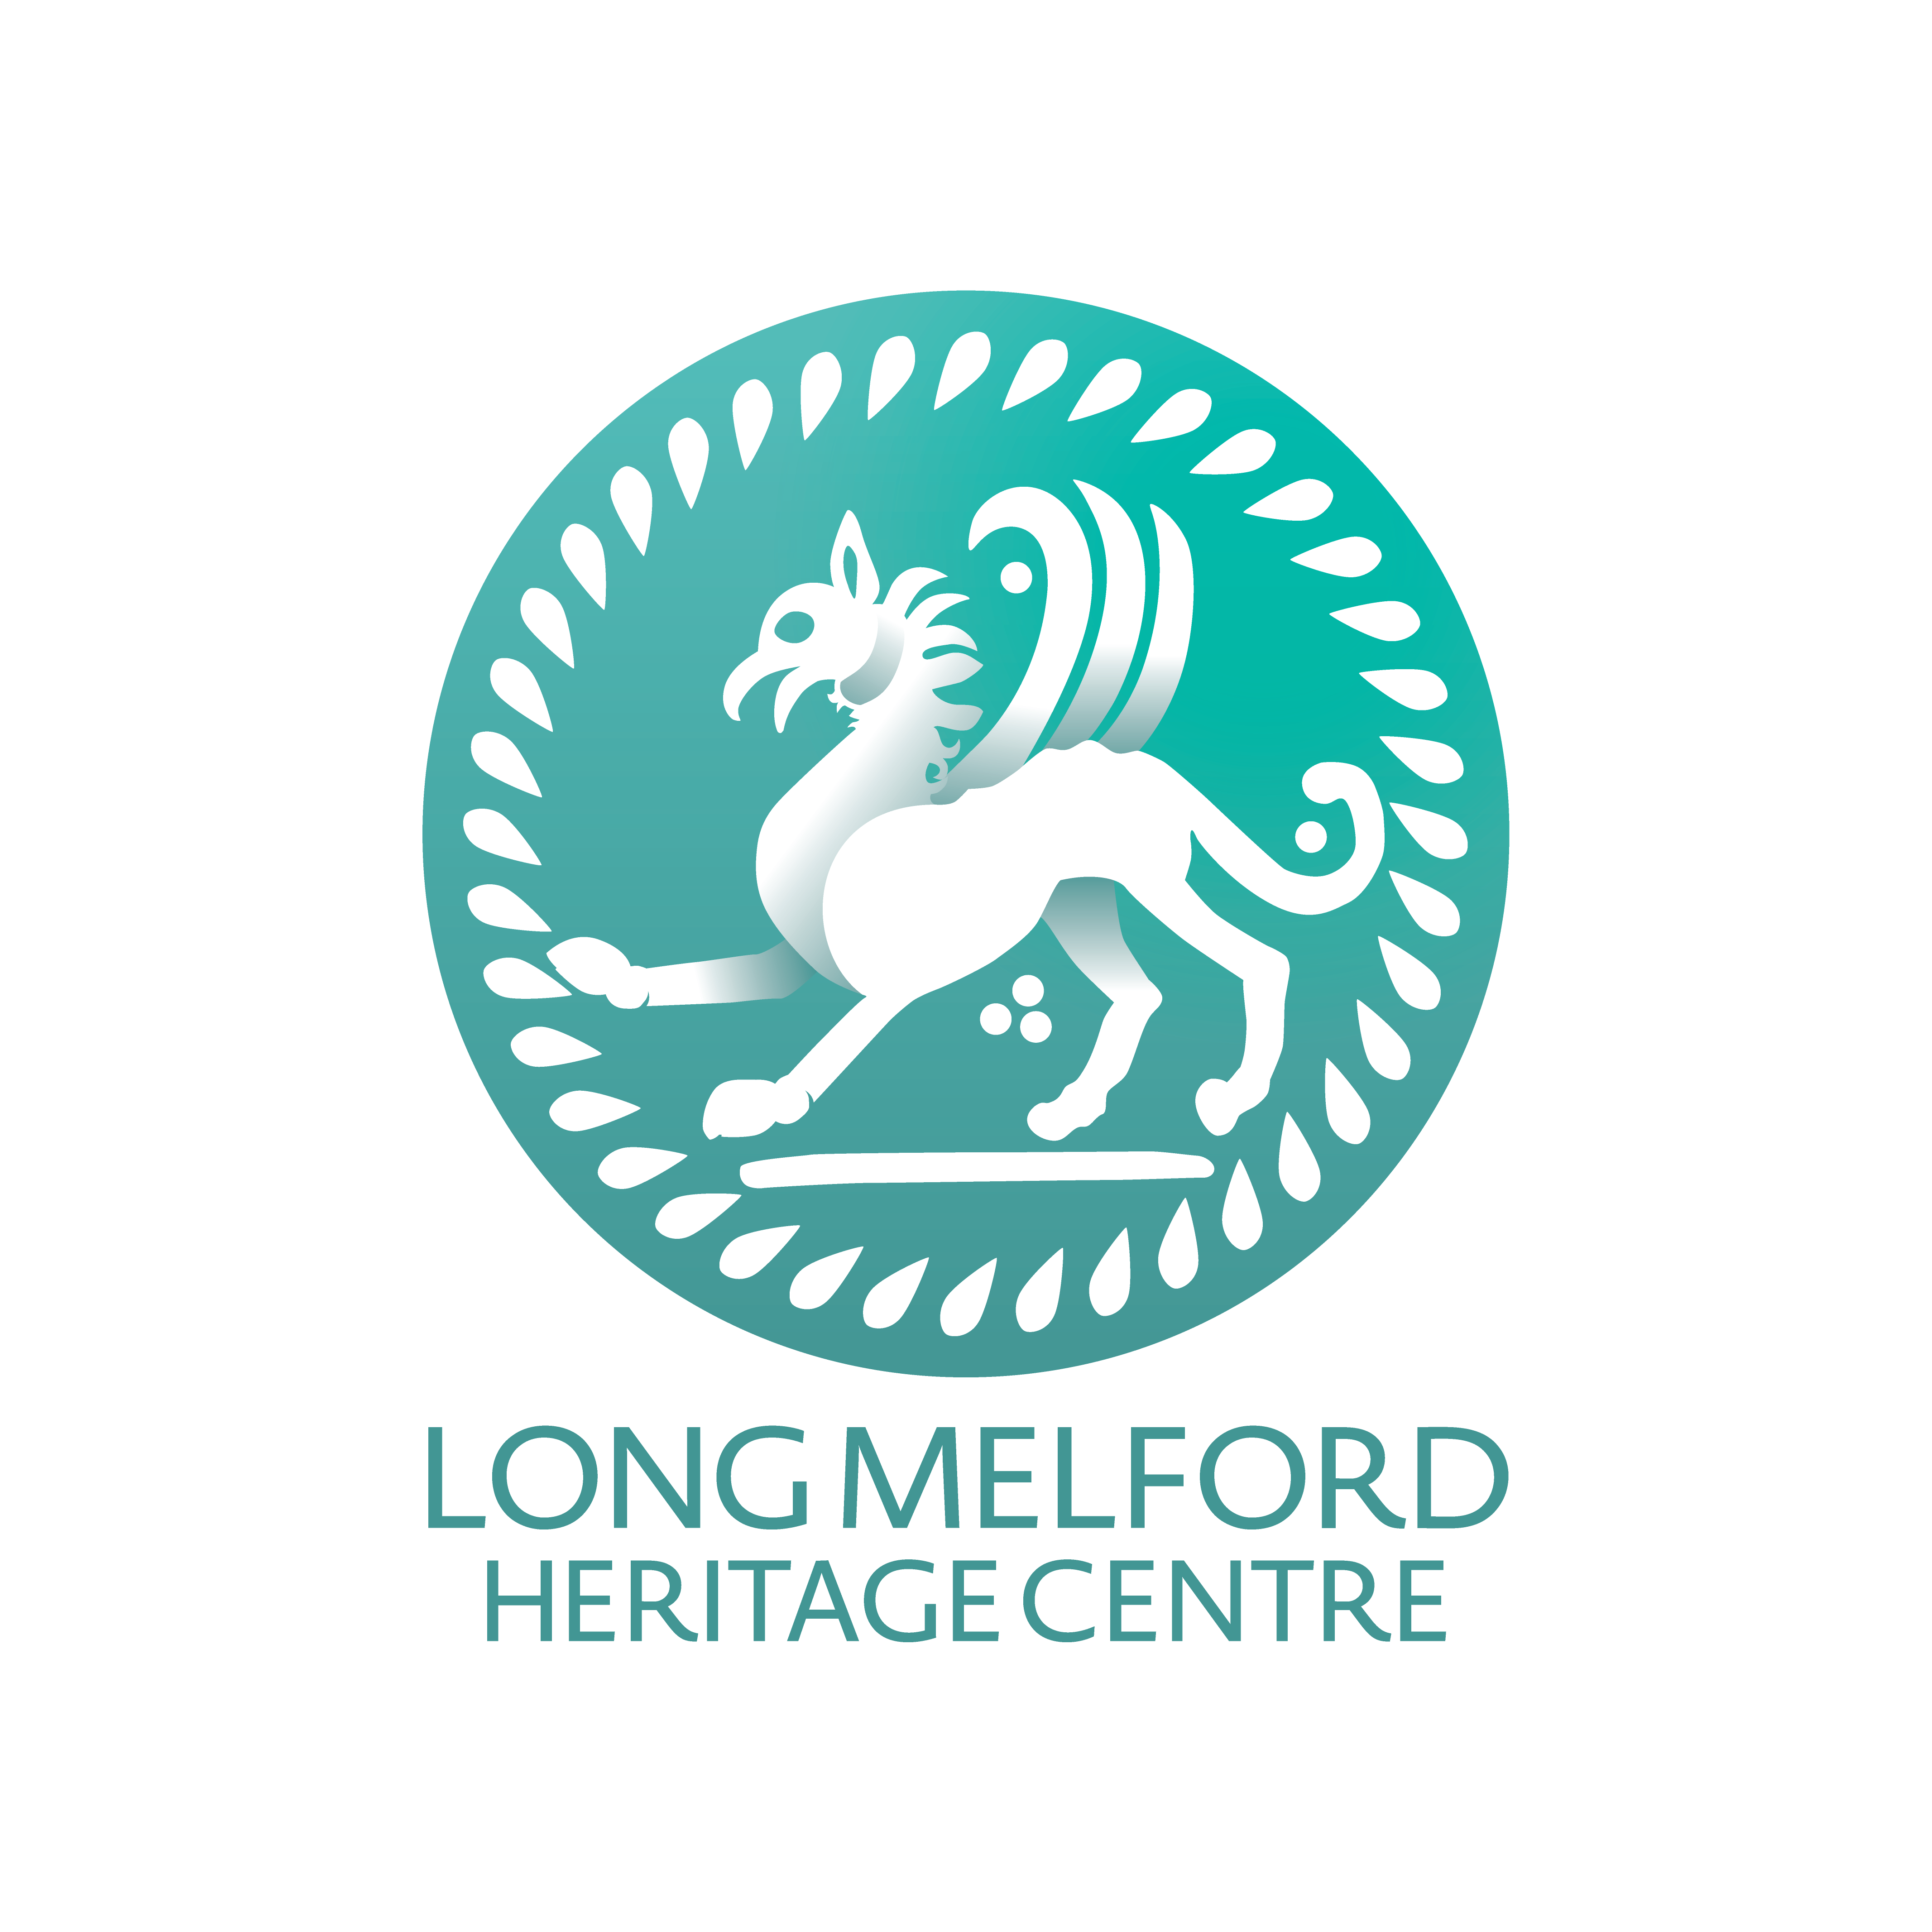 Long Melford Heritage Centre - A village with a big story